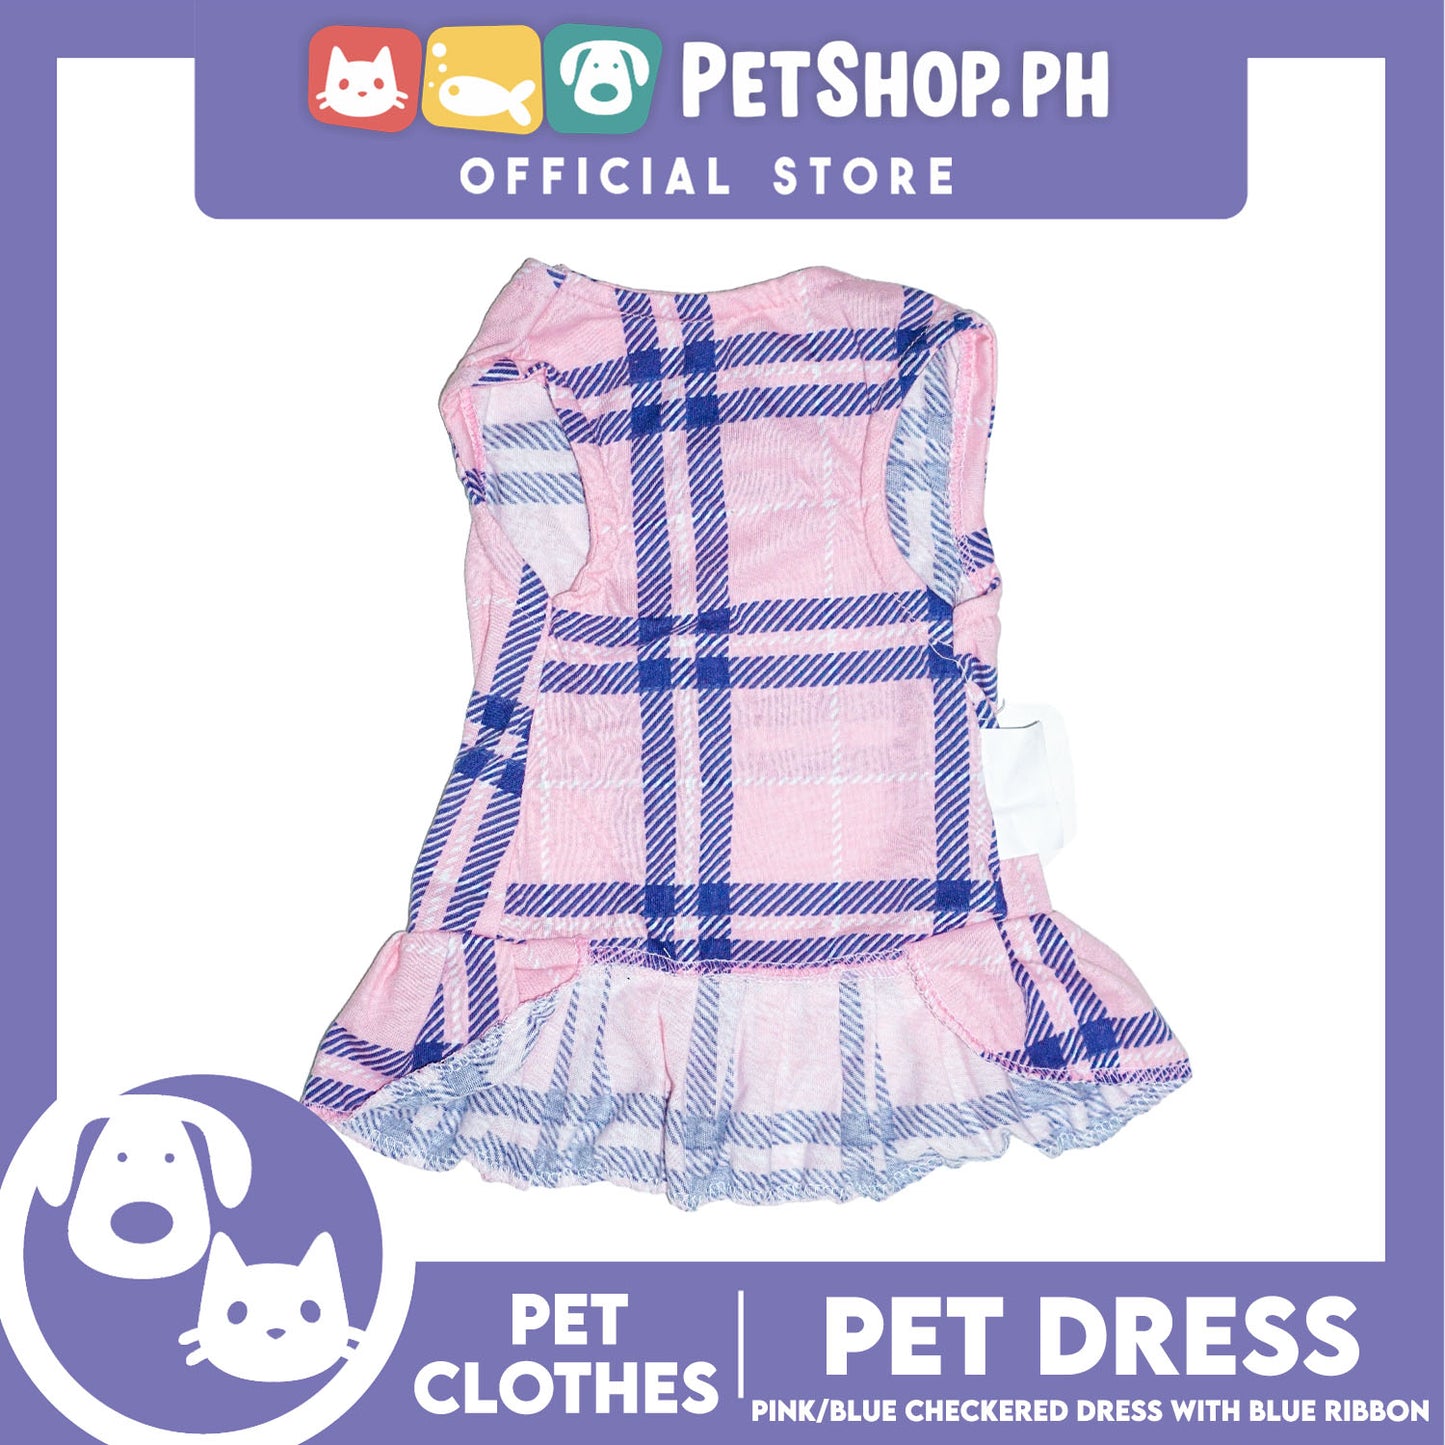 Pet Dress Pink/Blue Checkered Dress with Blue Ribbon (Small) Perfect Fit for Dogs and Cats